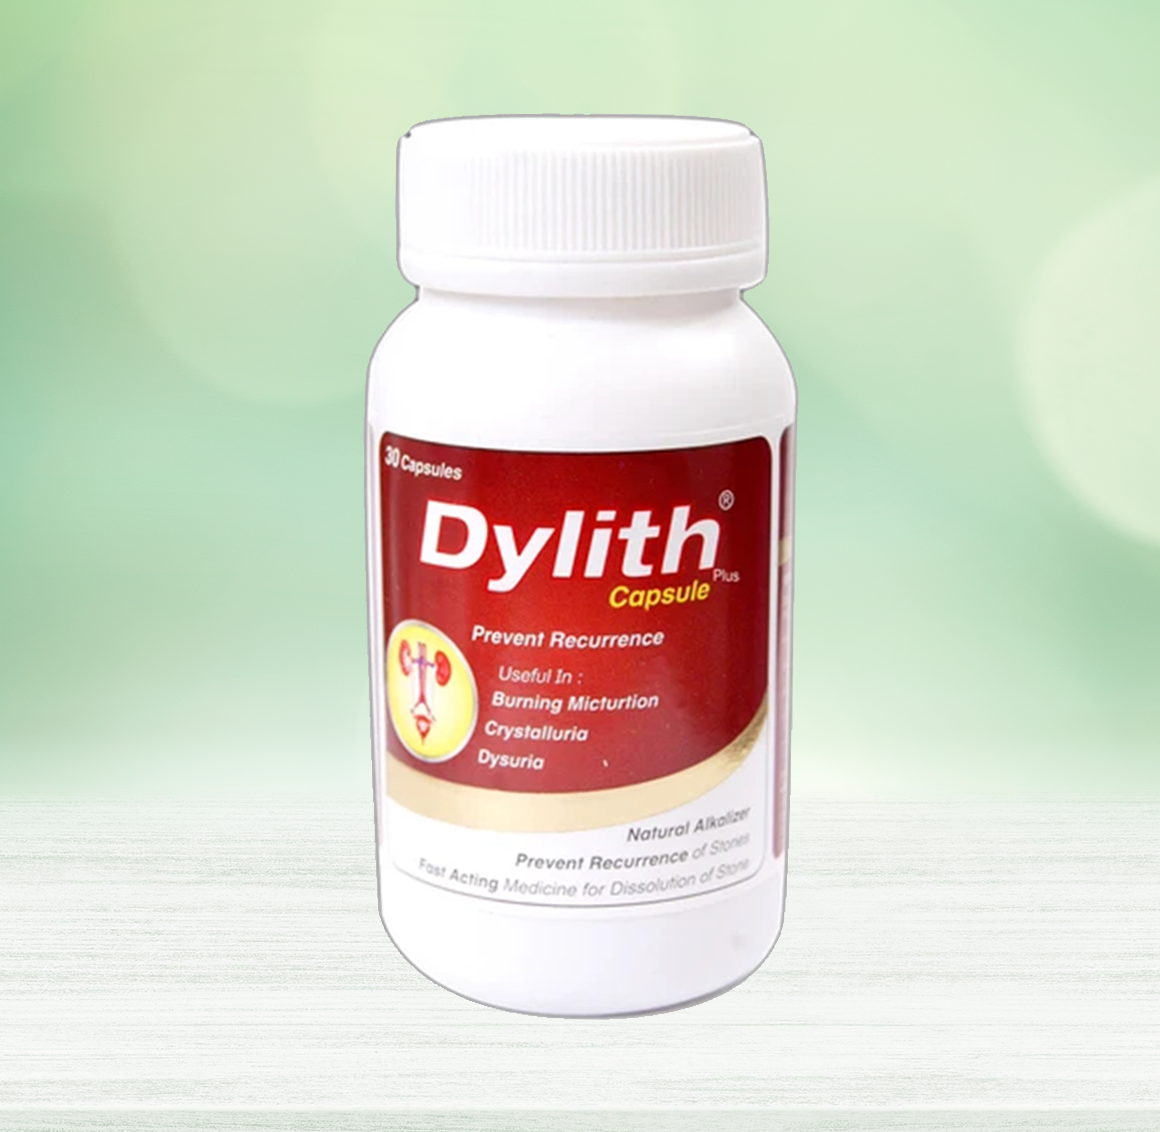 Indian herbal remedies/dylith Capsule